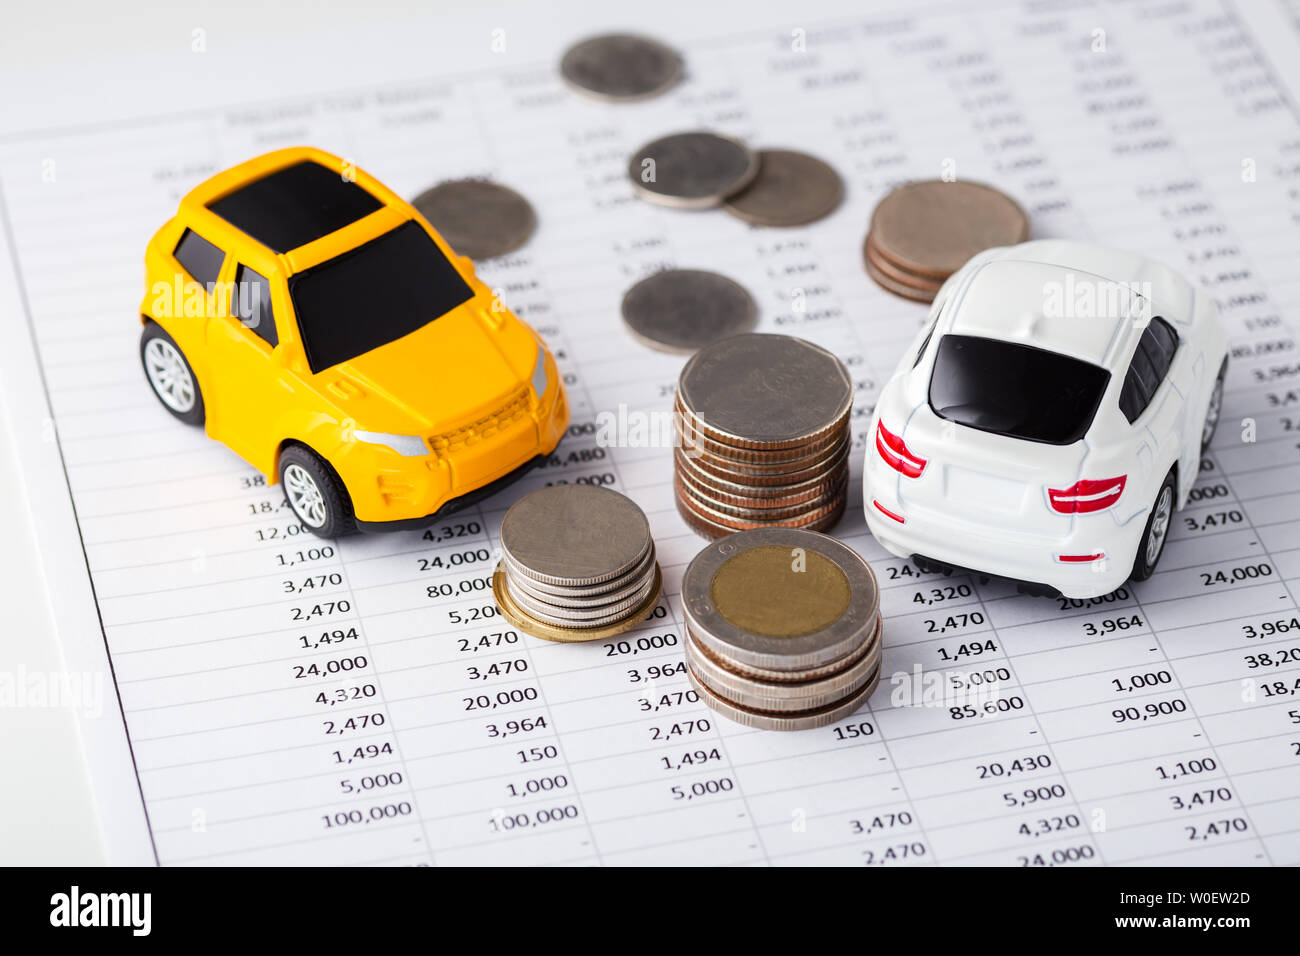 Cars and coins on financial statement, buying, trading, leasing Stock Photo